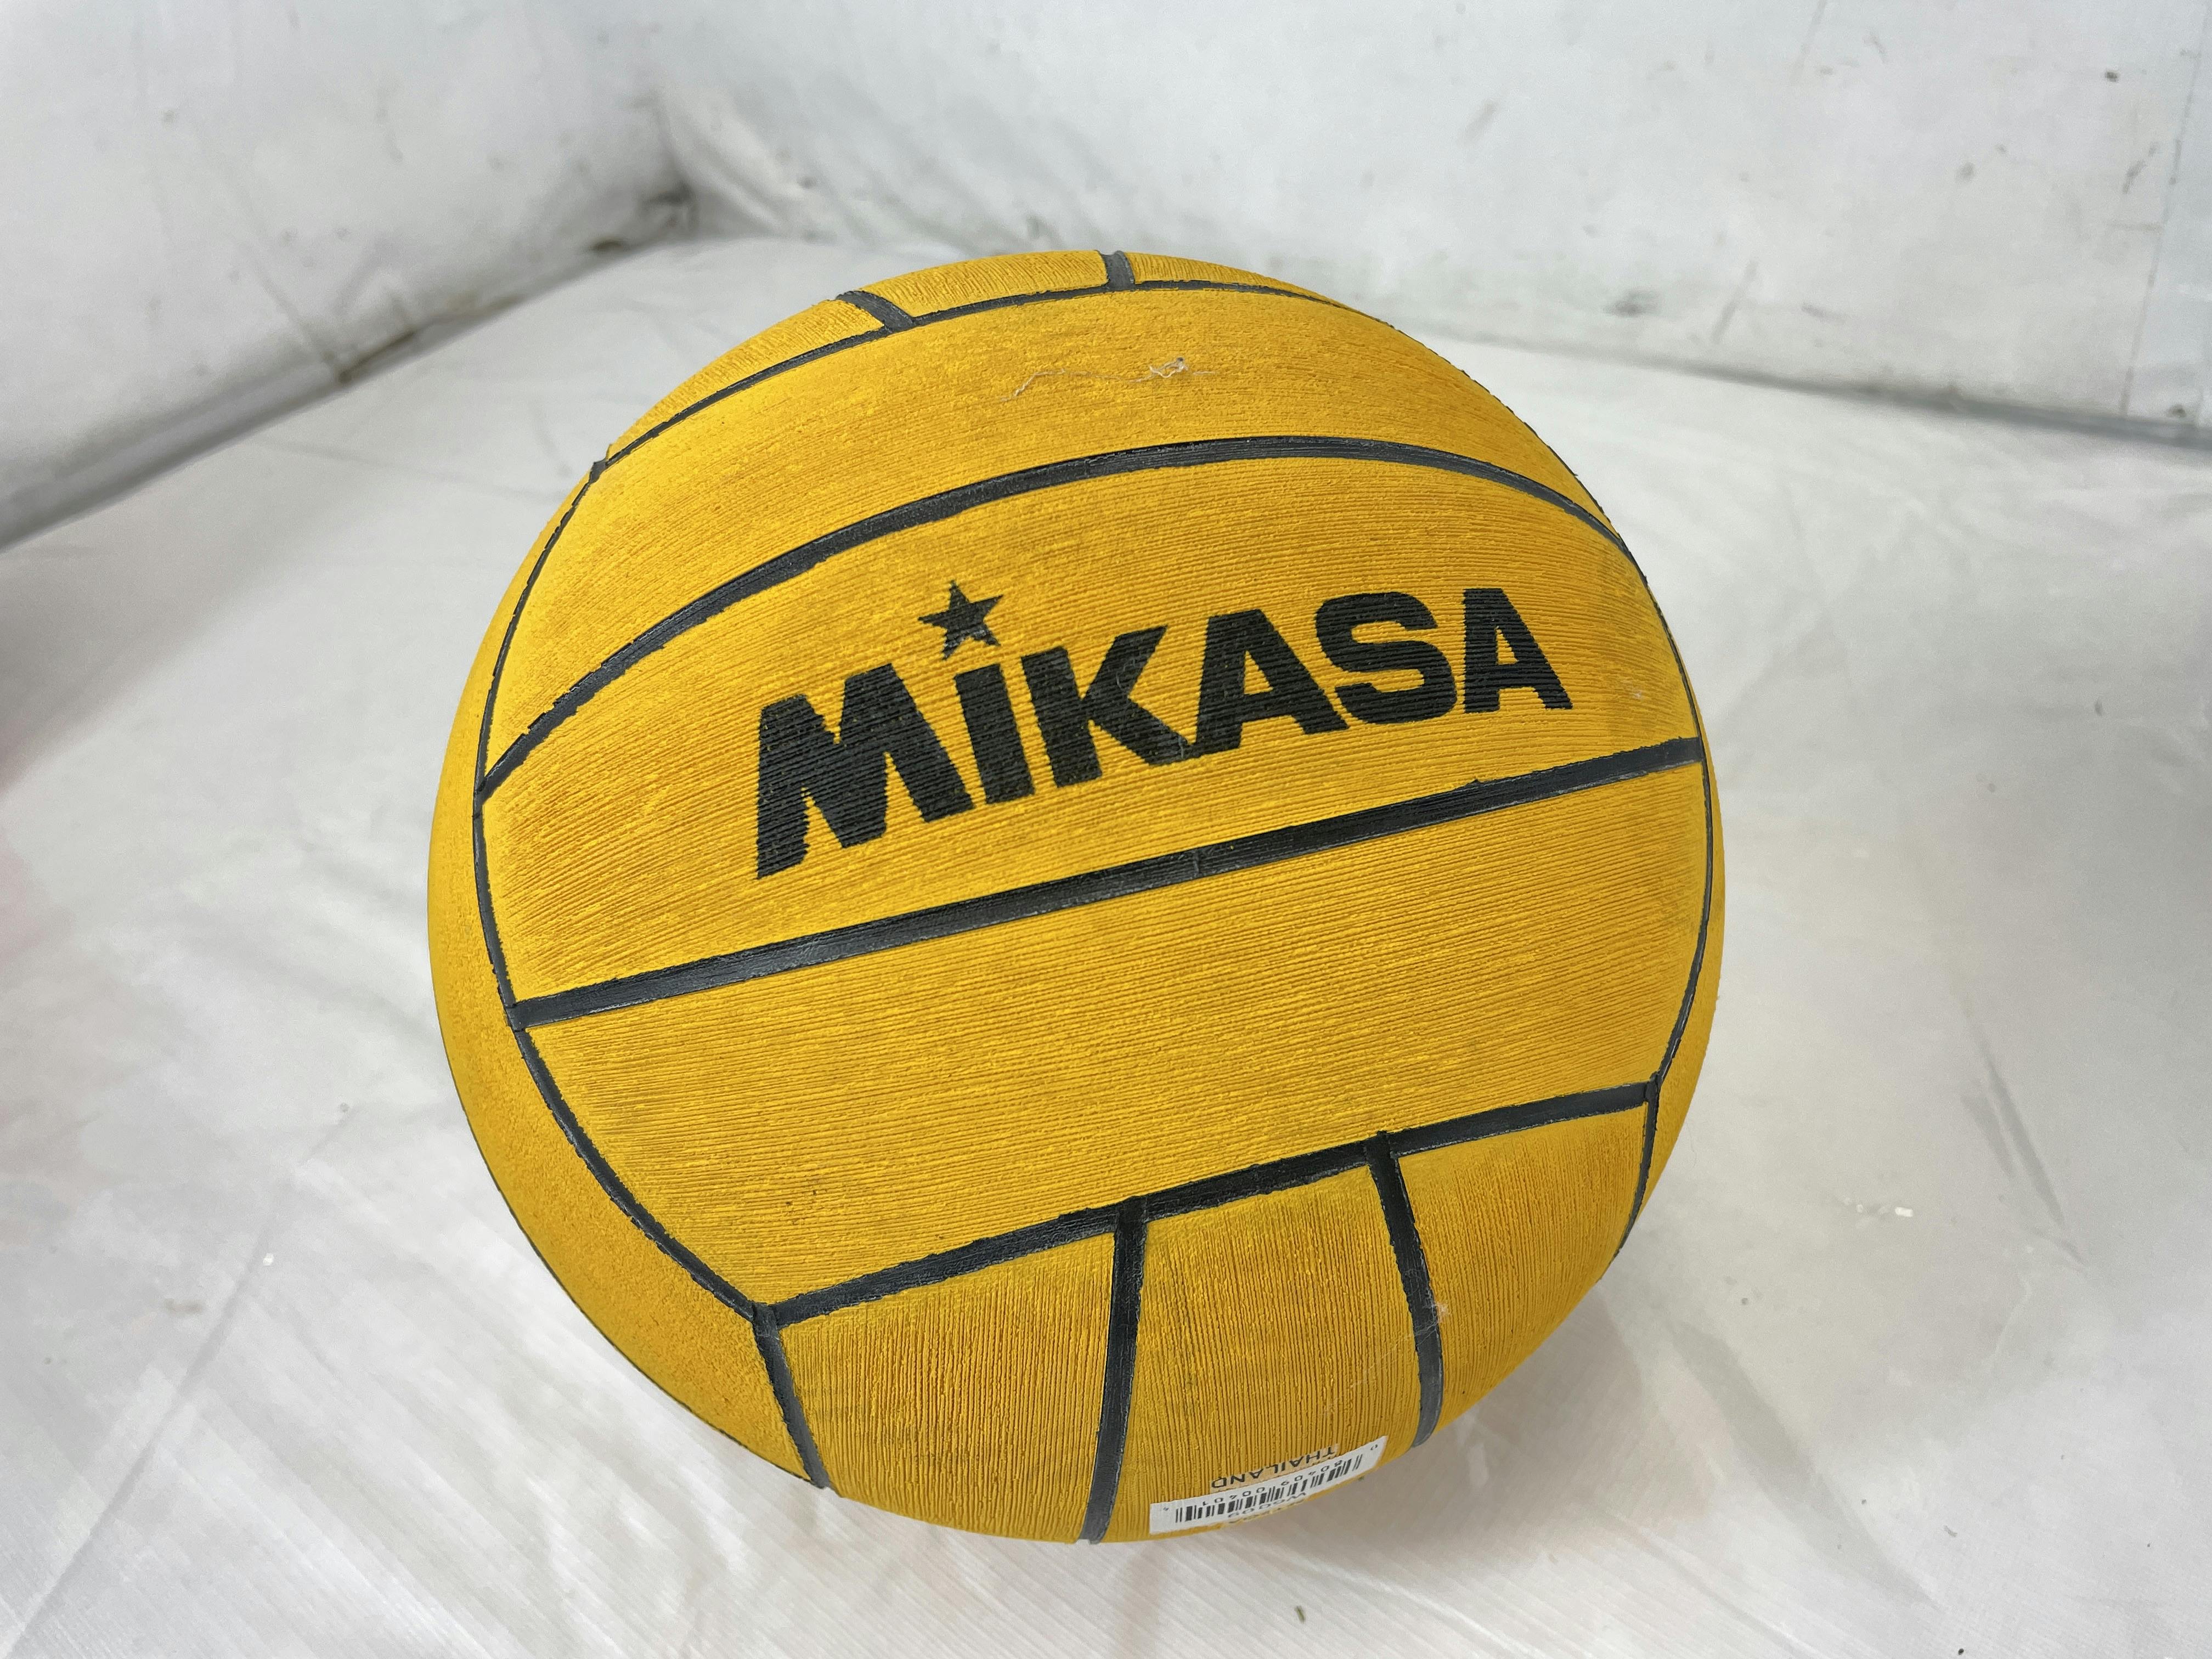 Mikasa Water Polo Ball W6009 Compact NFHS Size 4 NEW